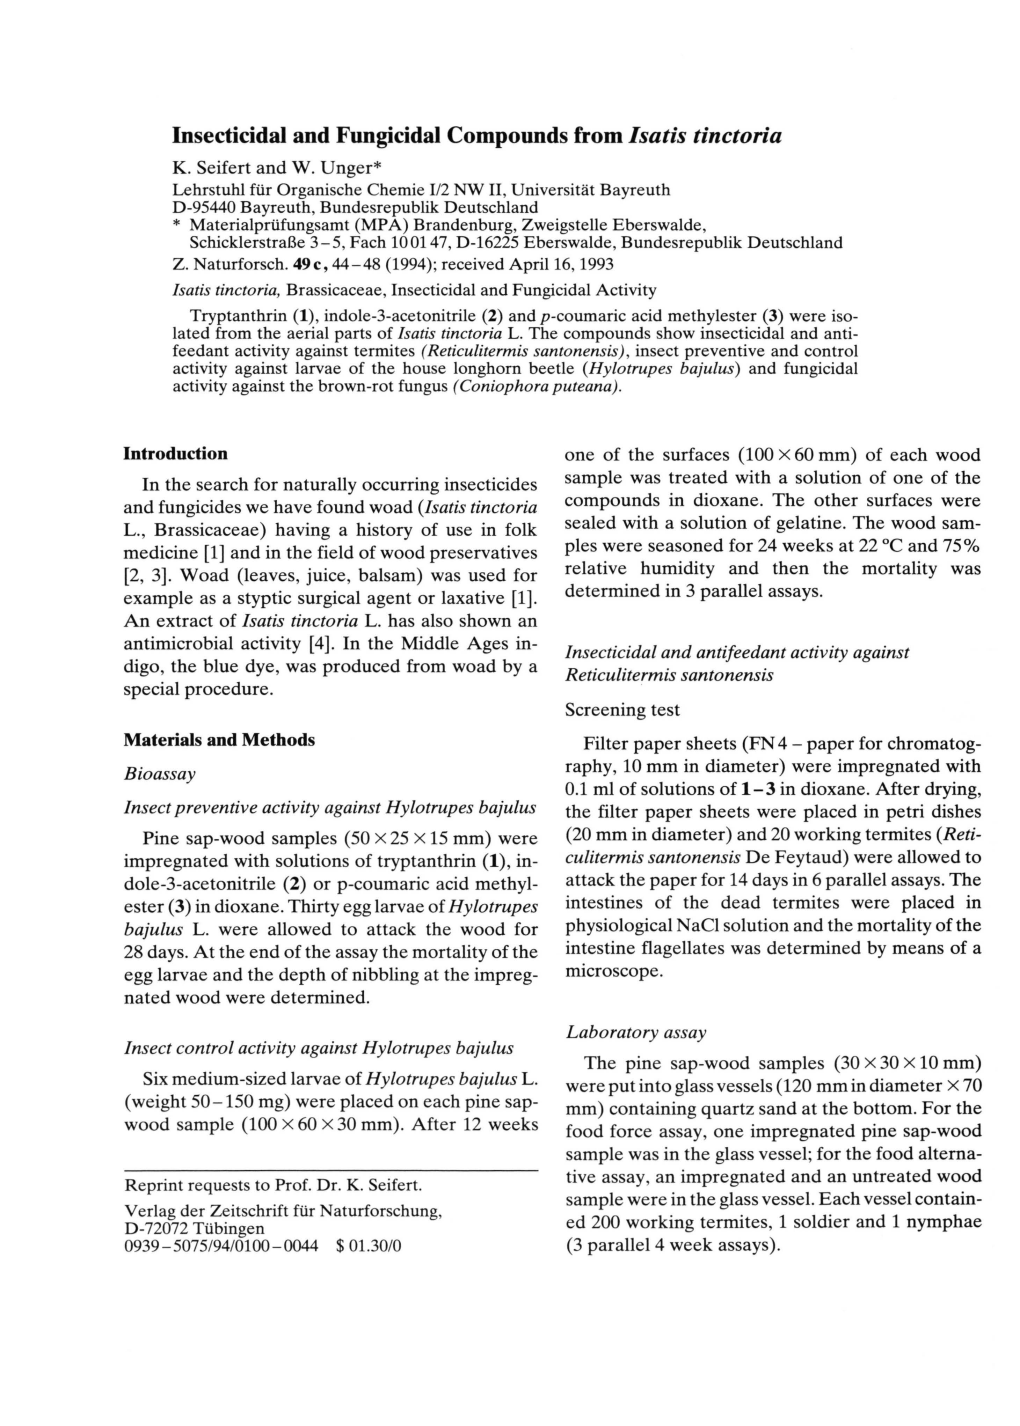 Insecticidal and Fungicidal Compounds from Isatis Tinctoria K